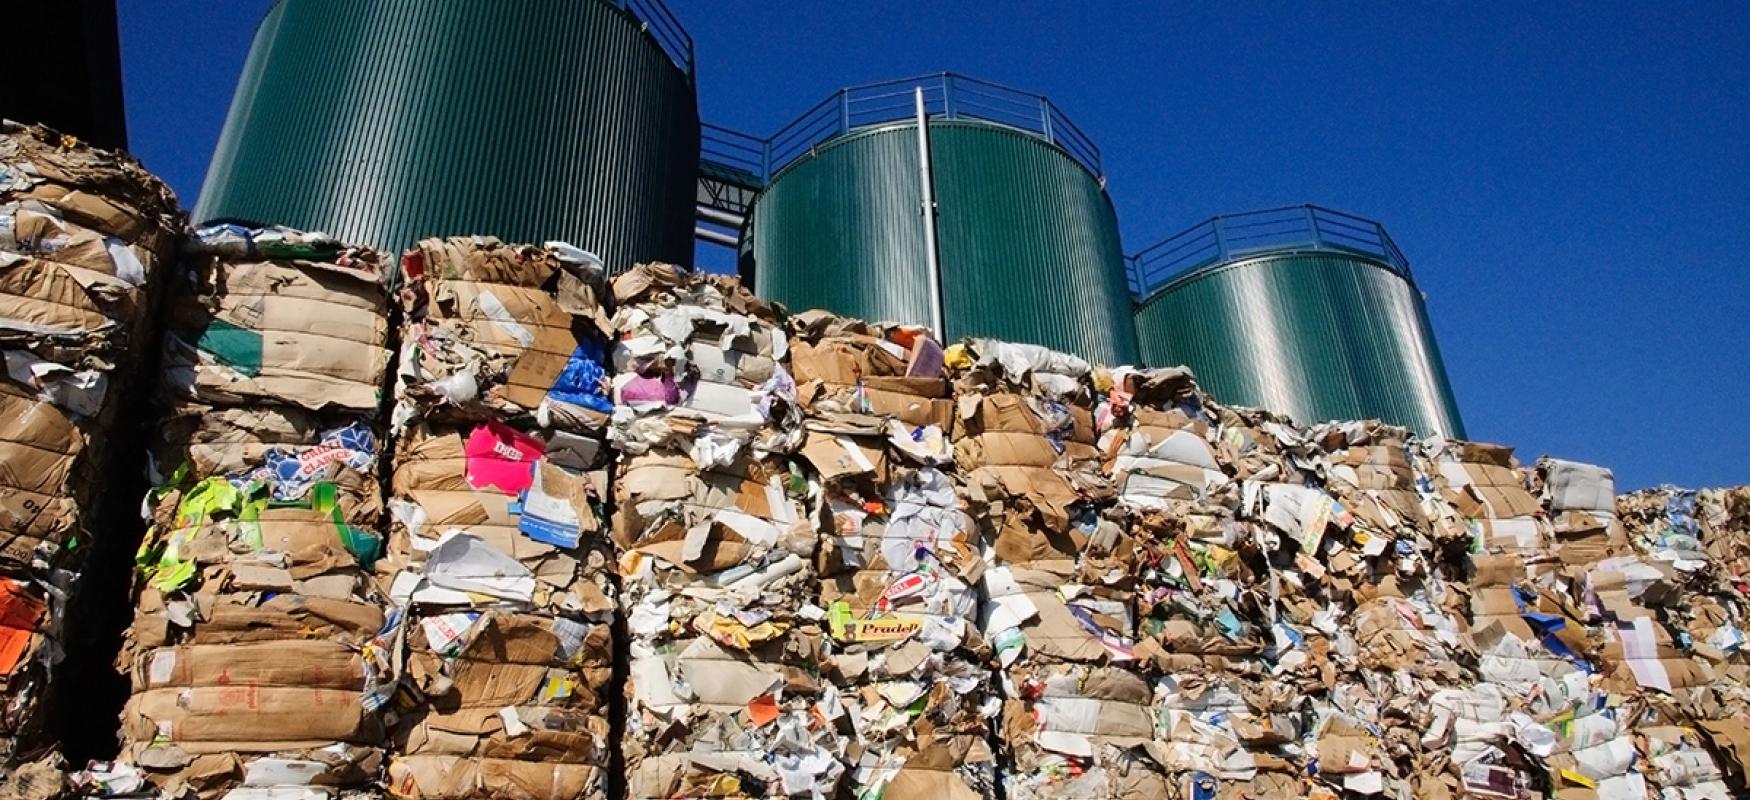 Piles of compressed trash in front of three silos.